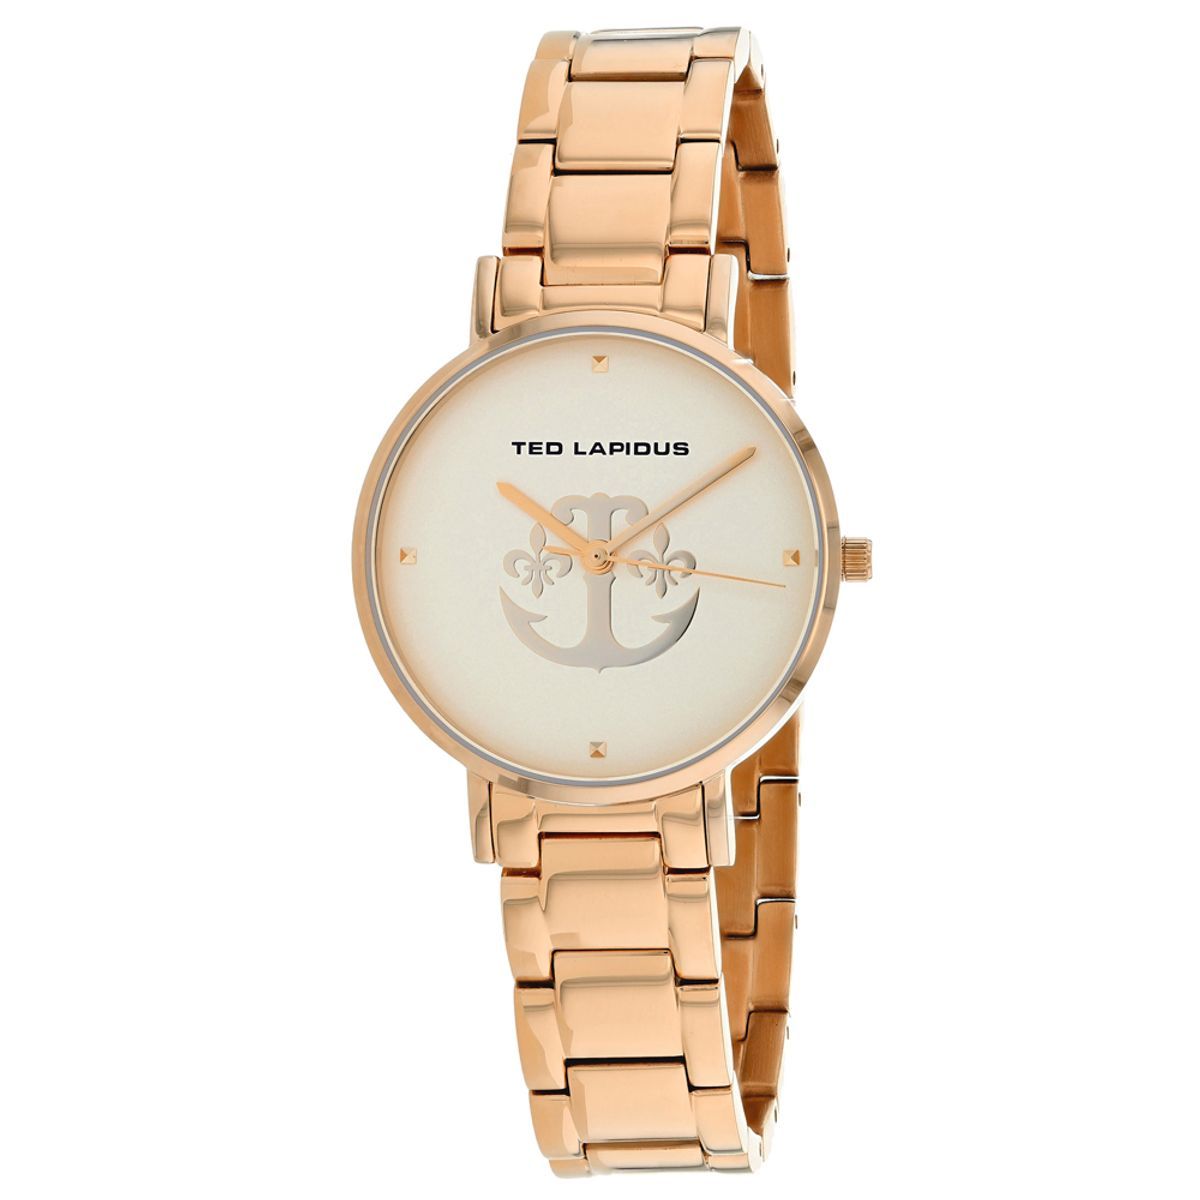 Photos - Wrist Watch Ted Lapidus Women's Classic Dial Watch - Rose Gold A0742URPX 